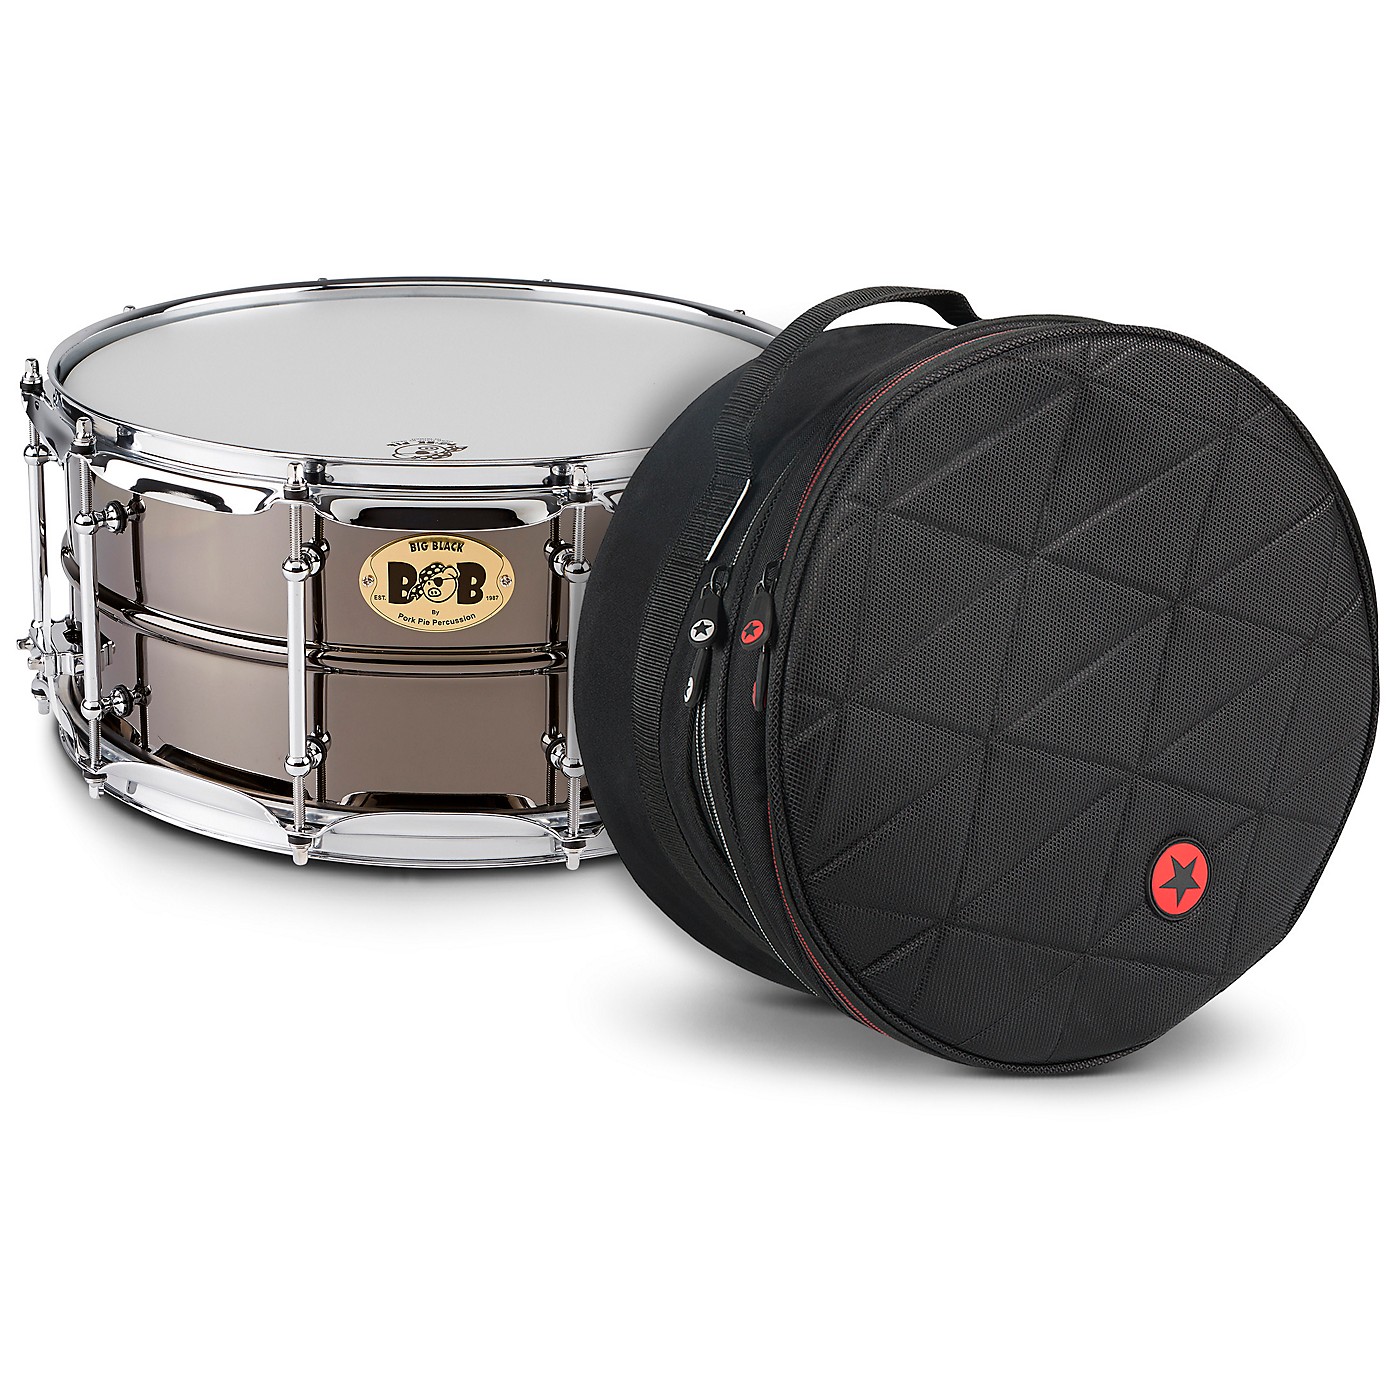 Pork Pie Big Black Brass Snare Drum with Tube Lugs and Chrome Hardware with Road Runner Bag thumbnail